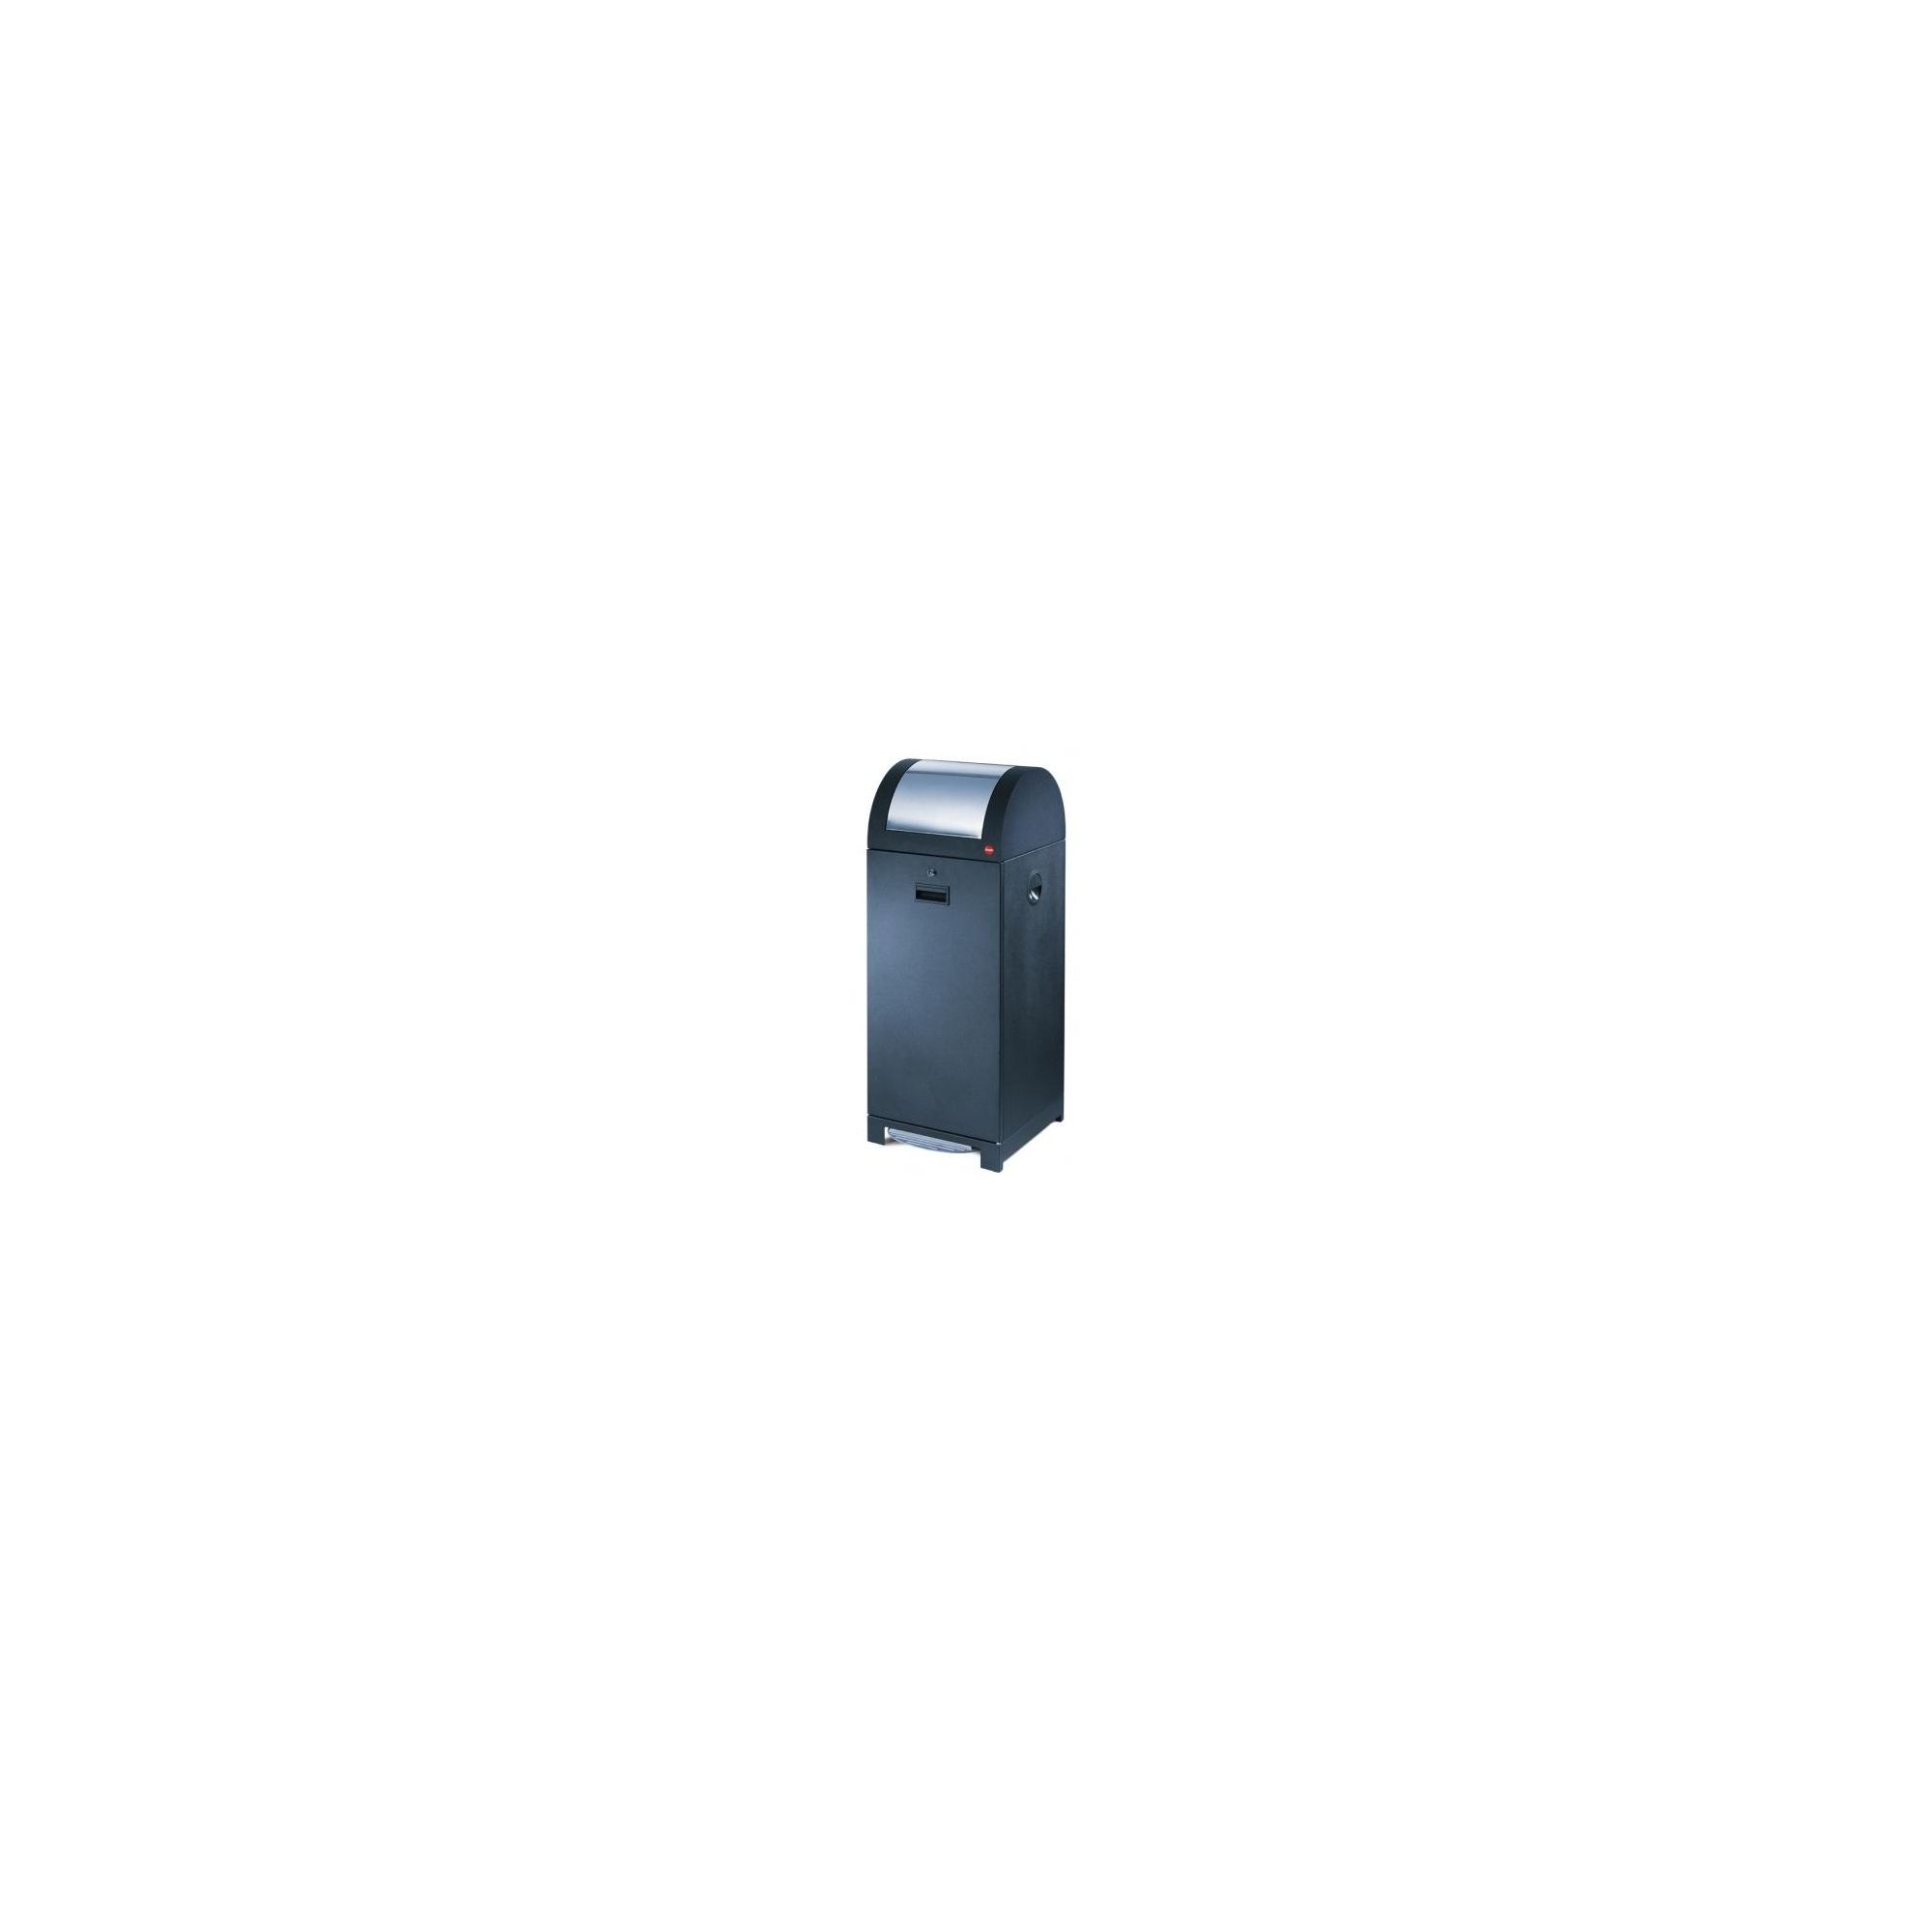 Hailo ProfiLine WSB Design 70 Recycling and Waste Bin in Black with Galvanized Inner Bin at Tescos Direct